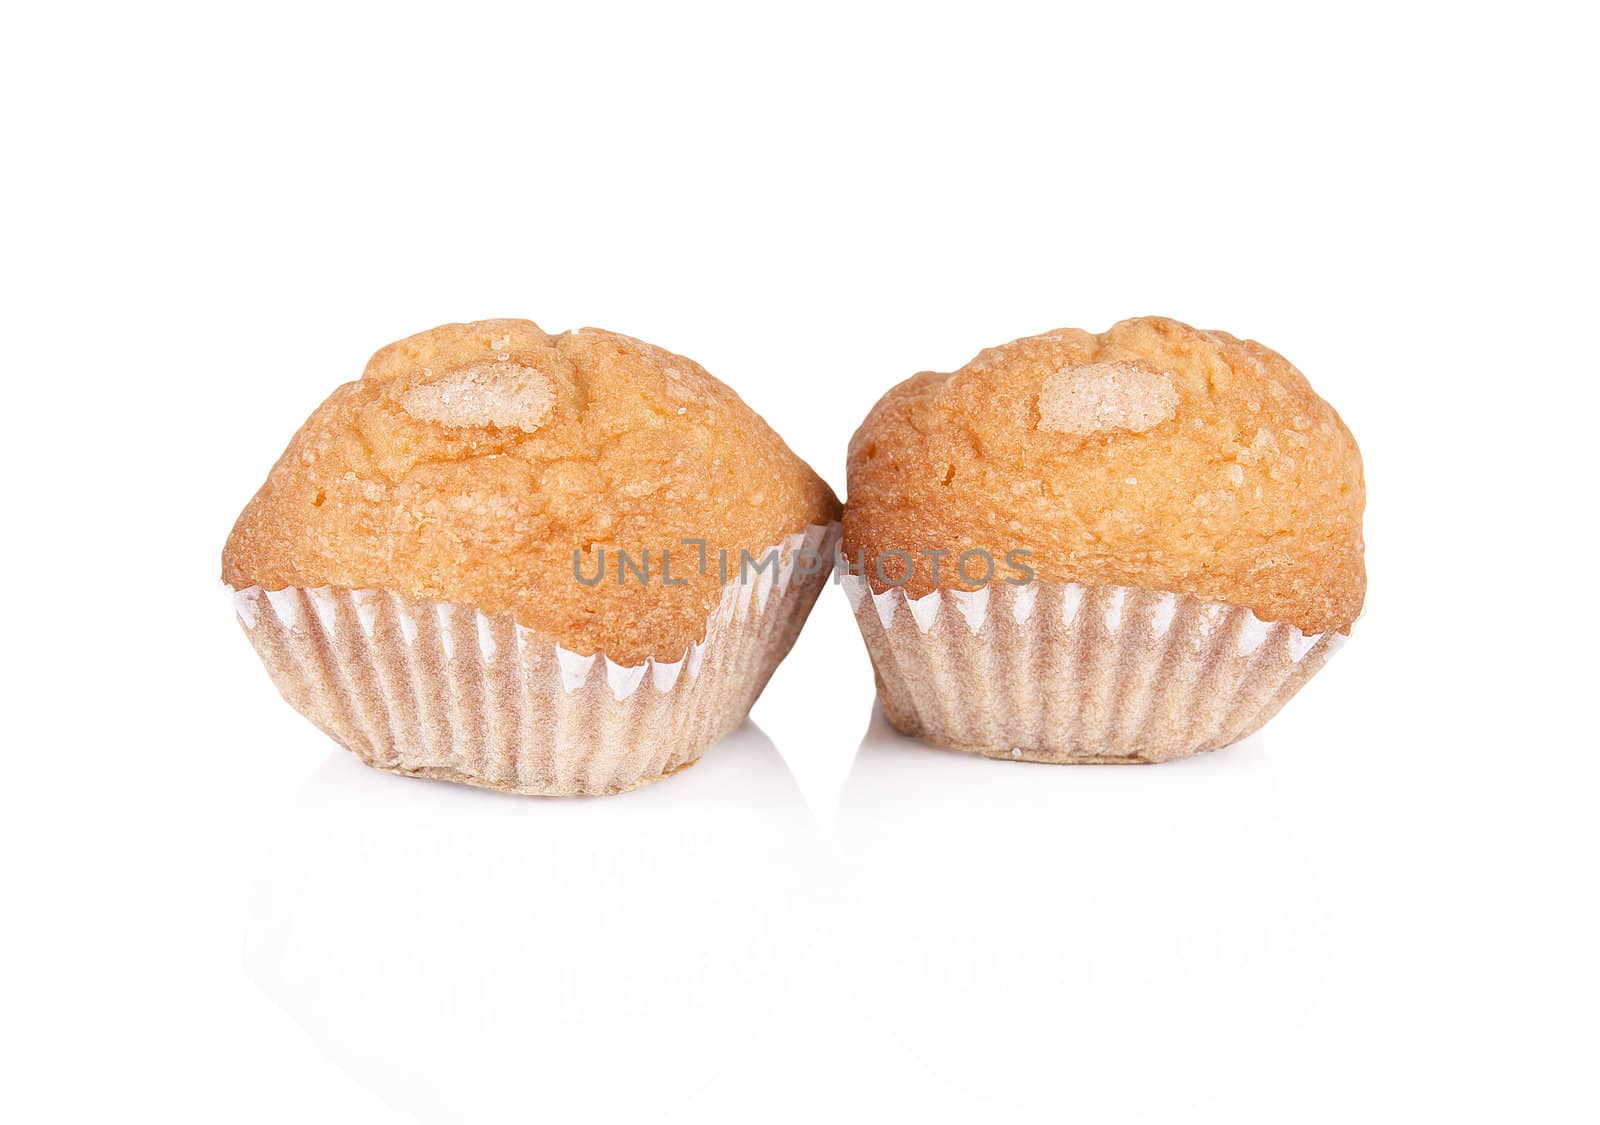 Pair of cupcakes over white isolated background